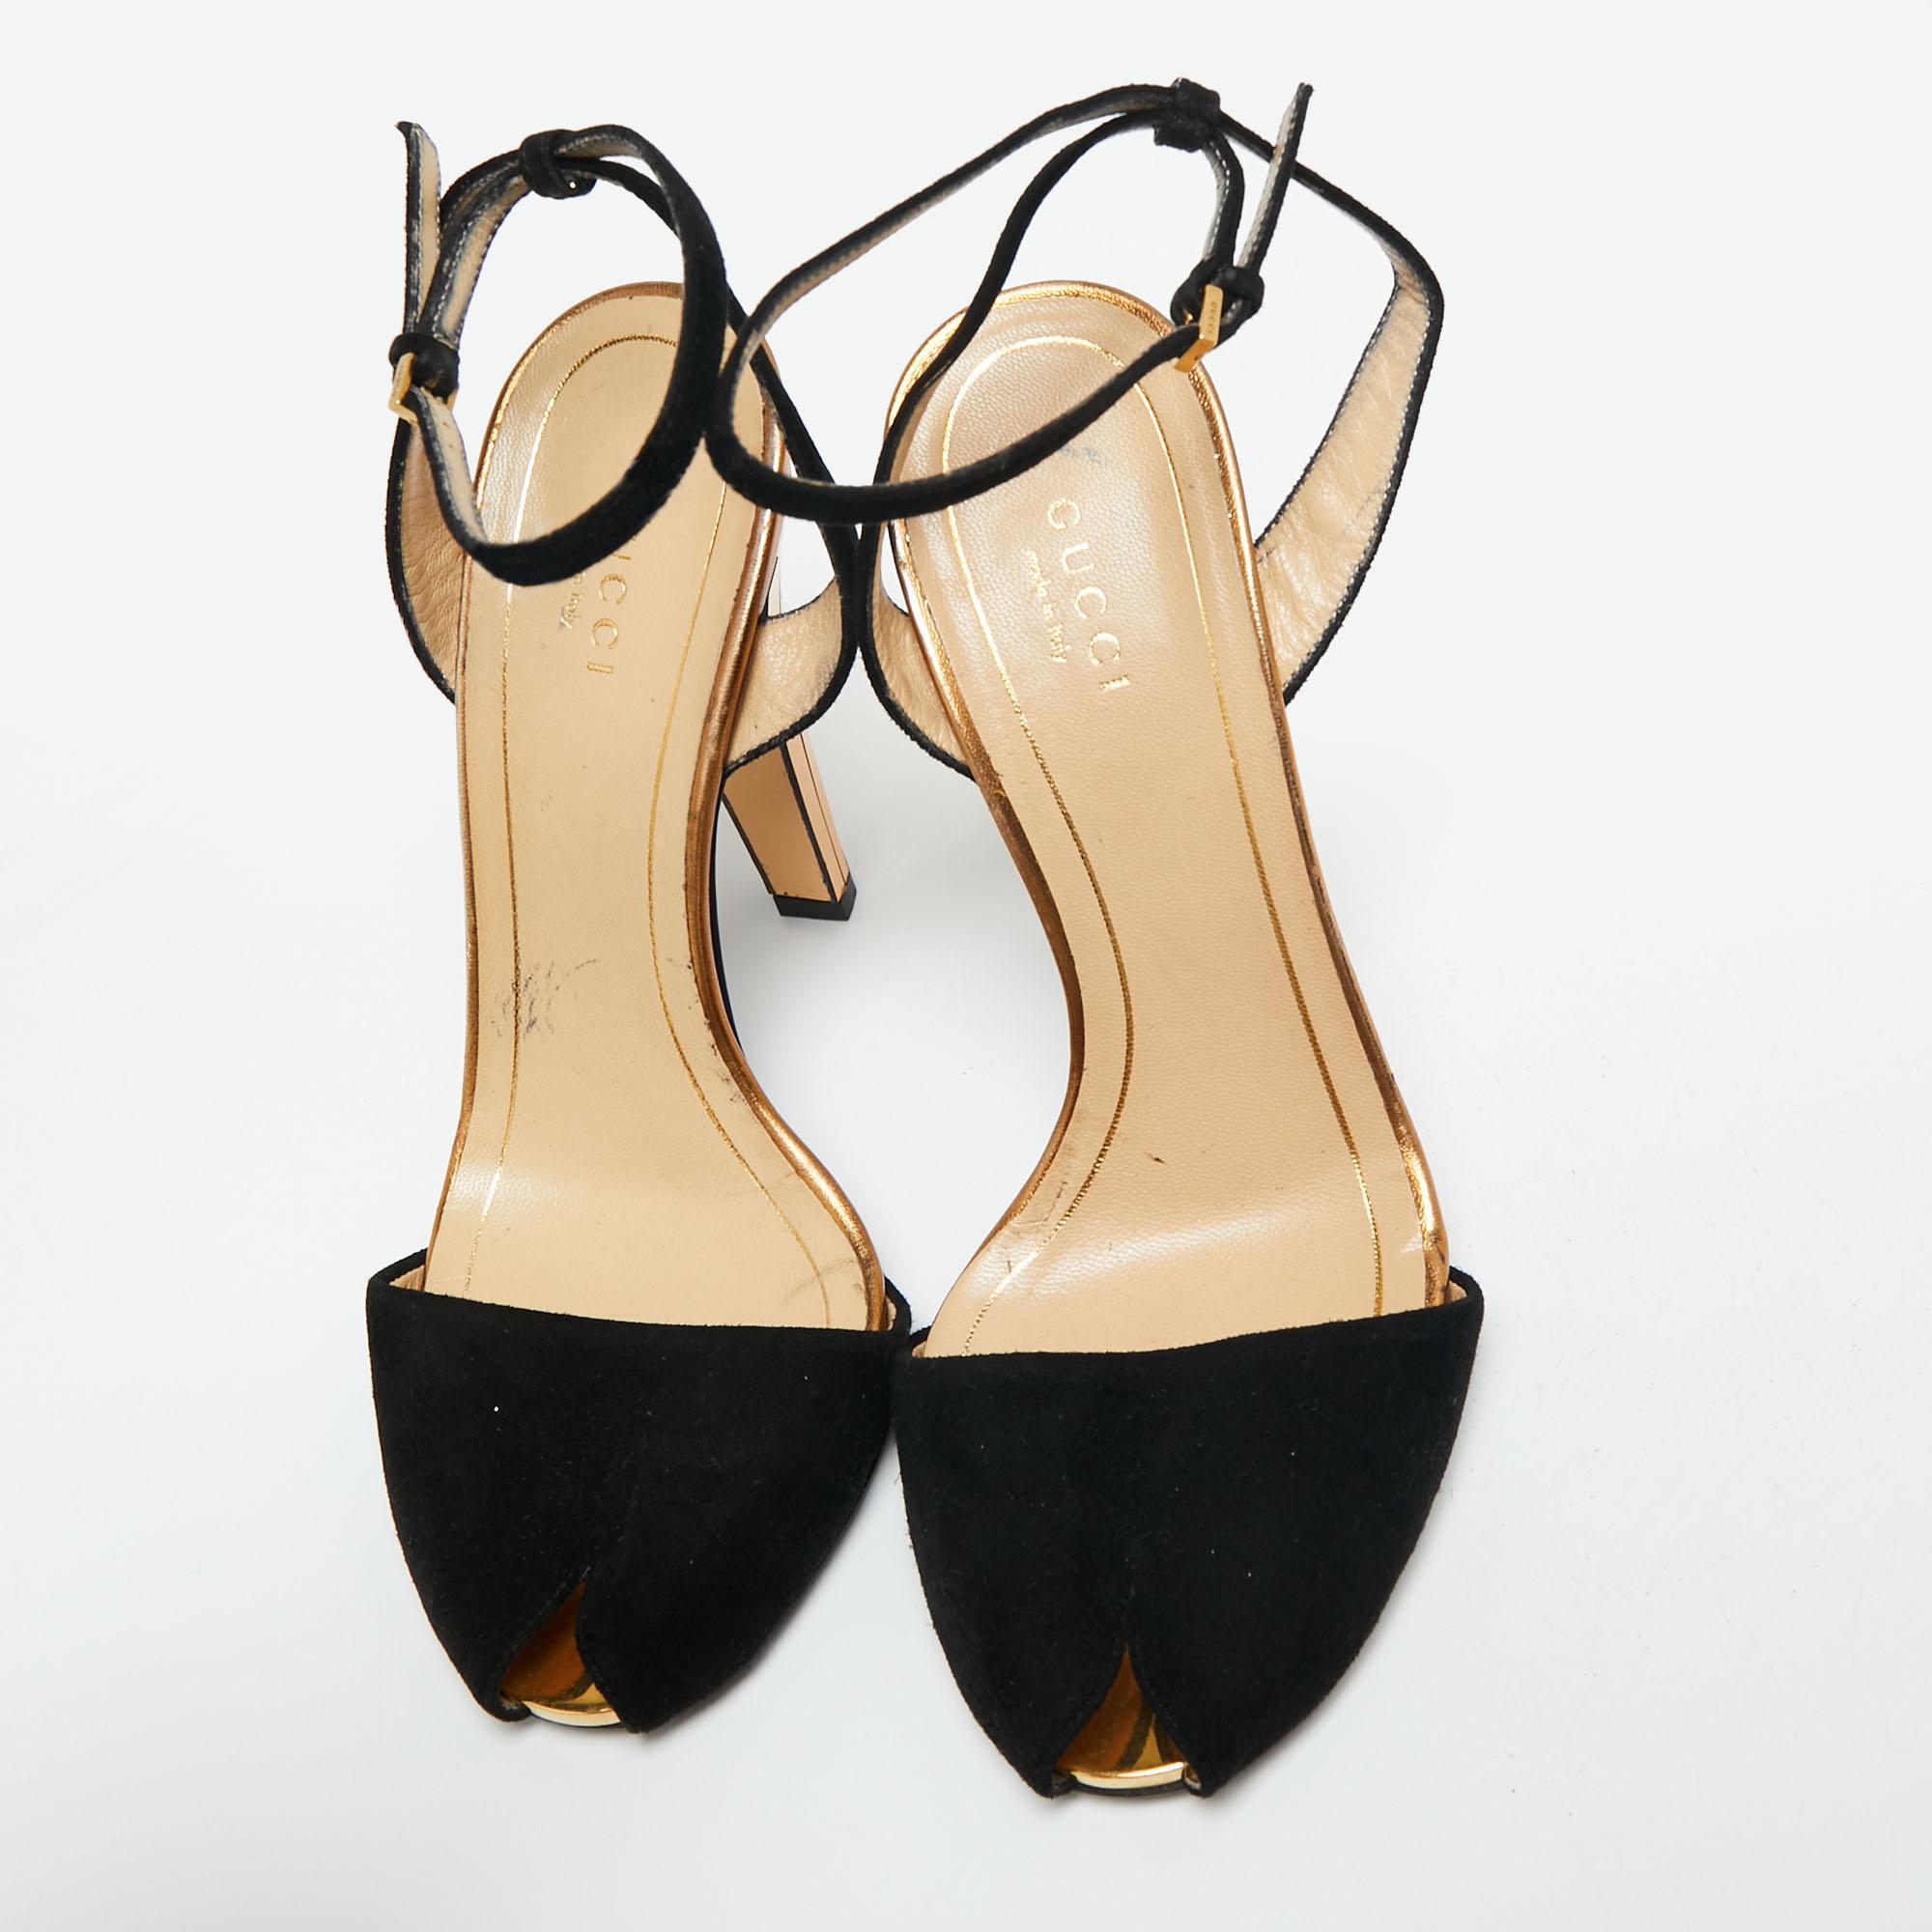 Gucci Black/Gold Suede Peep Toe Ankle Strap Sandals Size 38 4